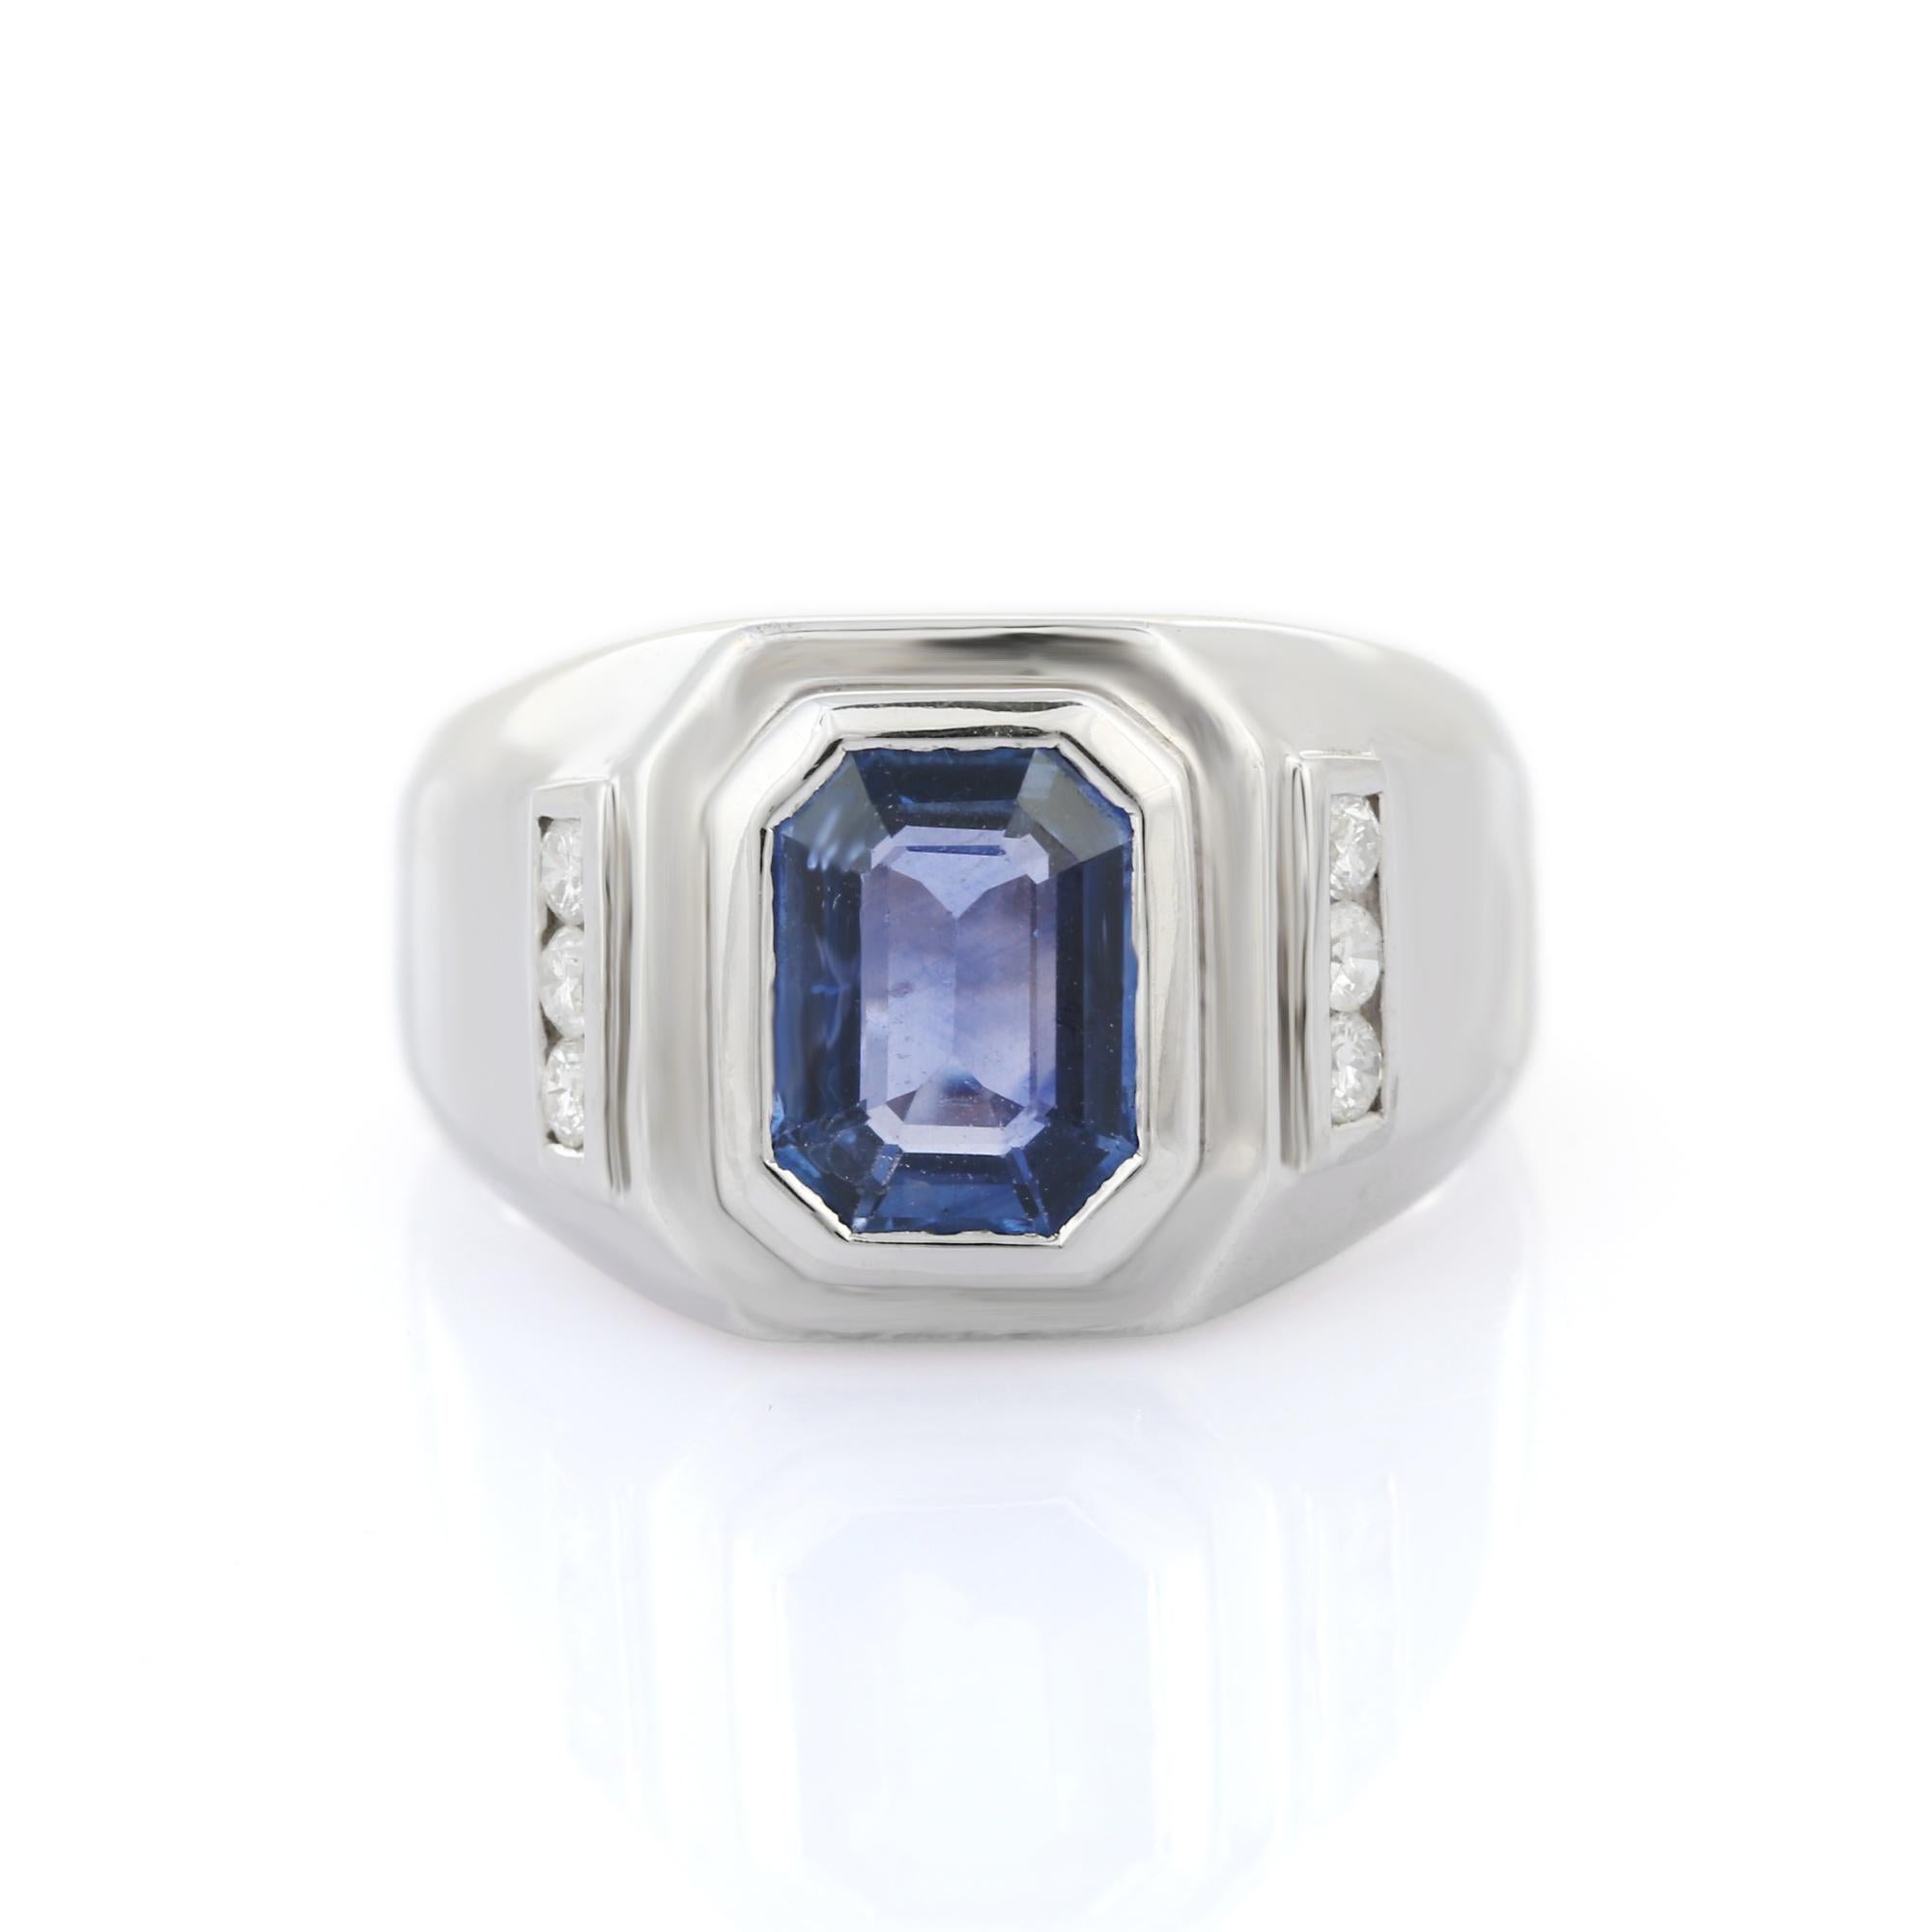 For Sale:  Statement Blue Sapphire and Diamond Men's Wedding Ring 18k White Gold 5